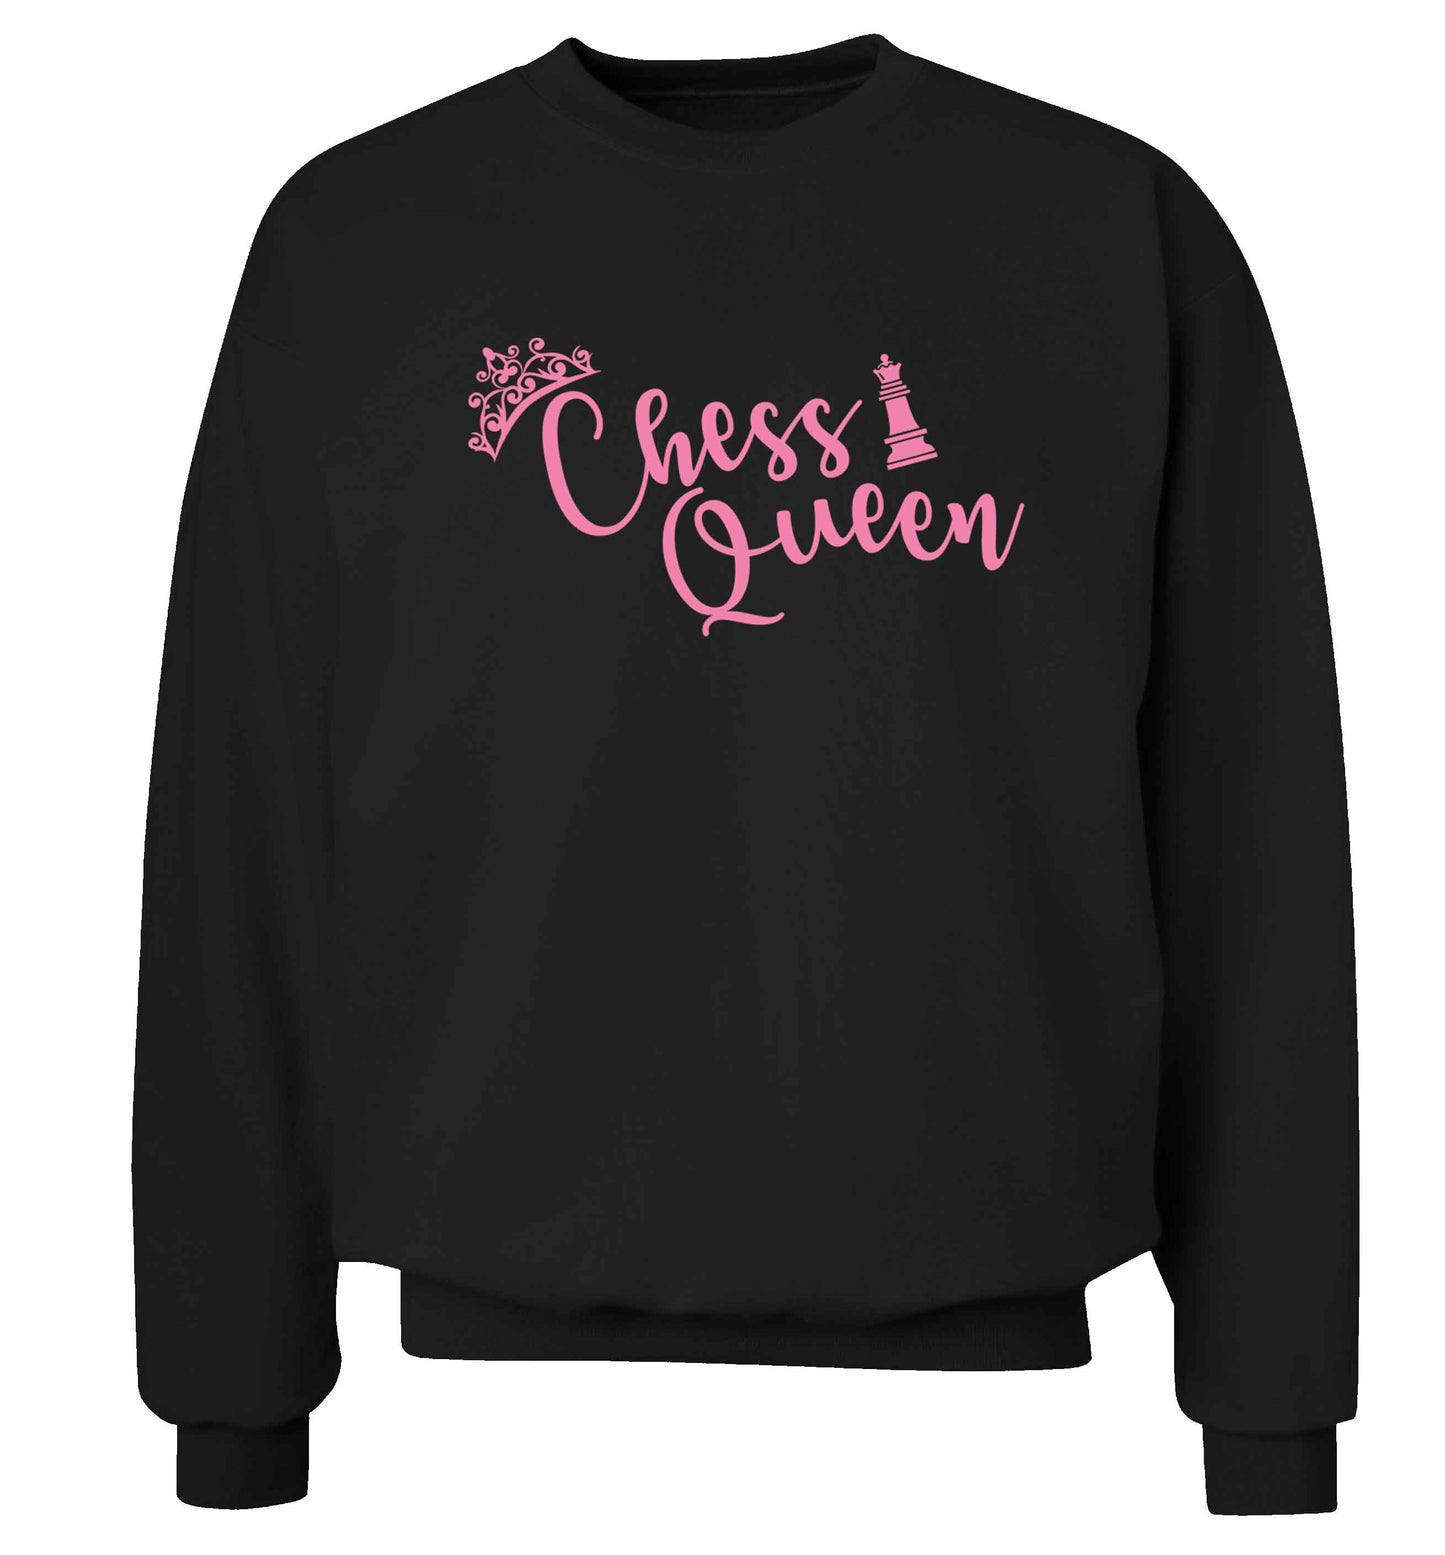 Pink chess queen  Adult's unisex black Sweater 2XL